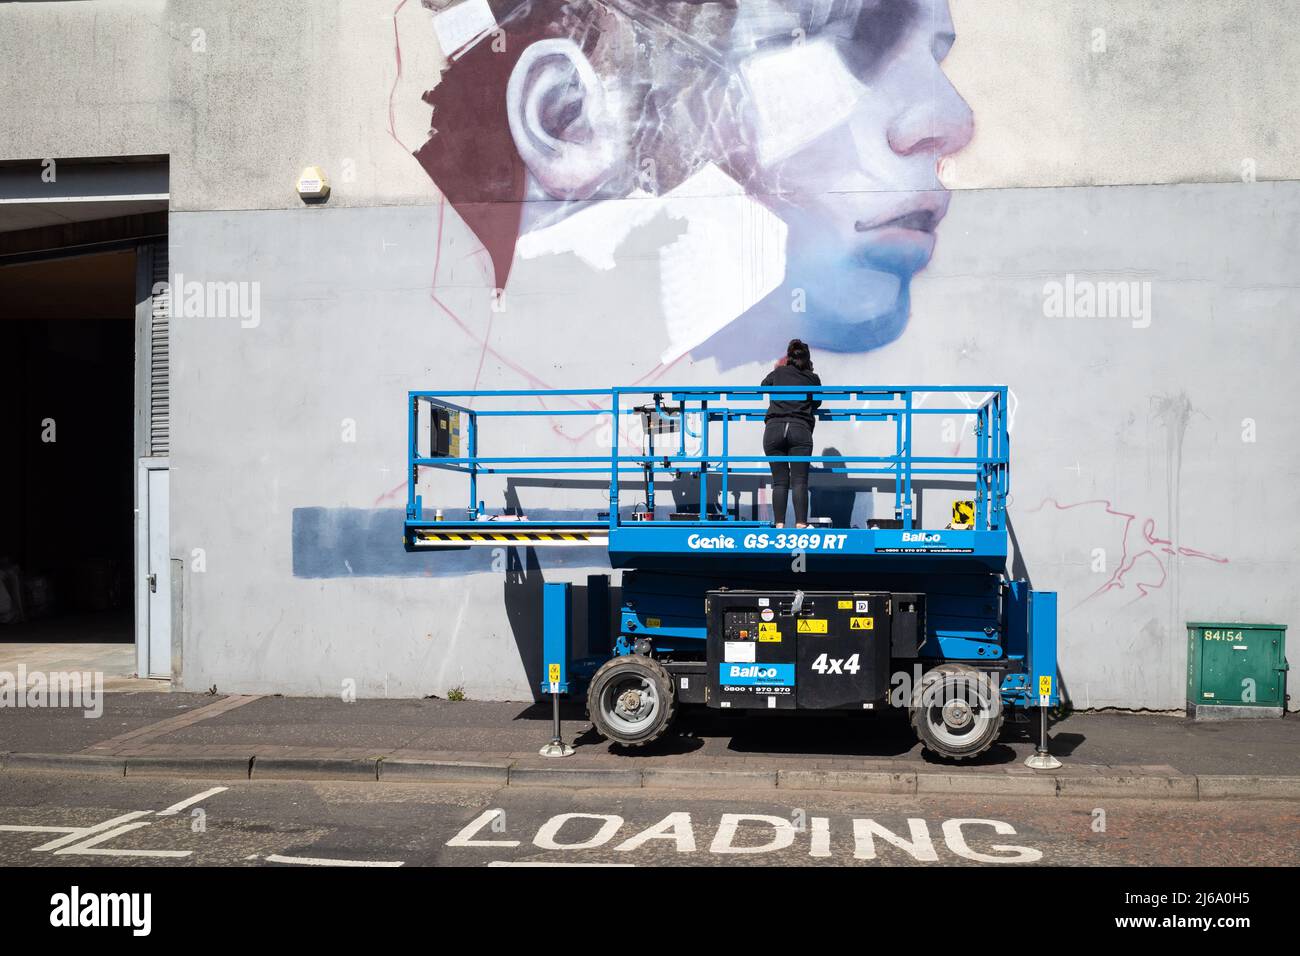 Street artist painting a mural in the Co. Antrim town of Larne, Northern Ireland Stock Photo